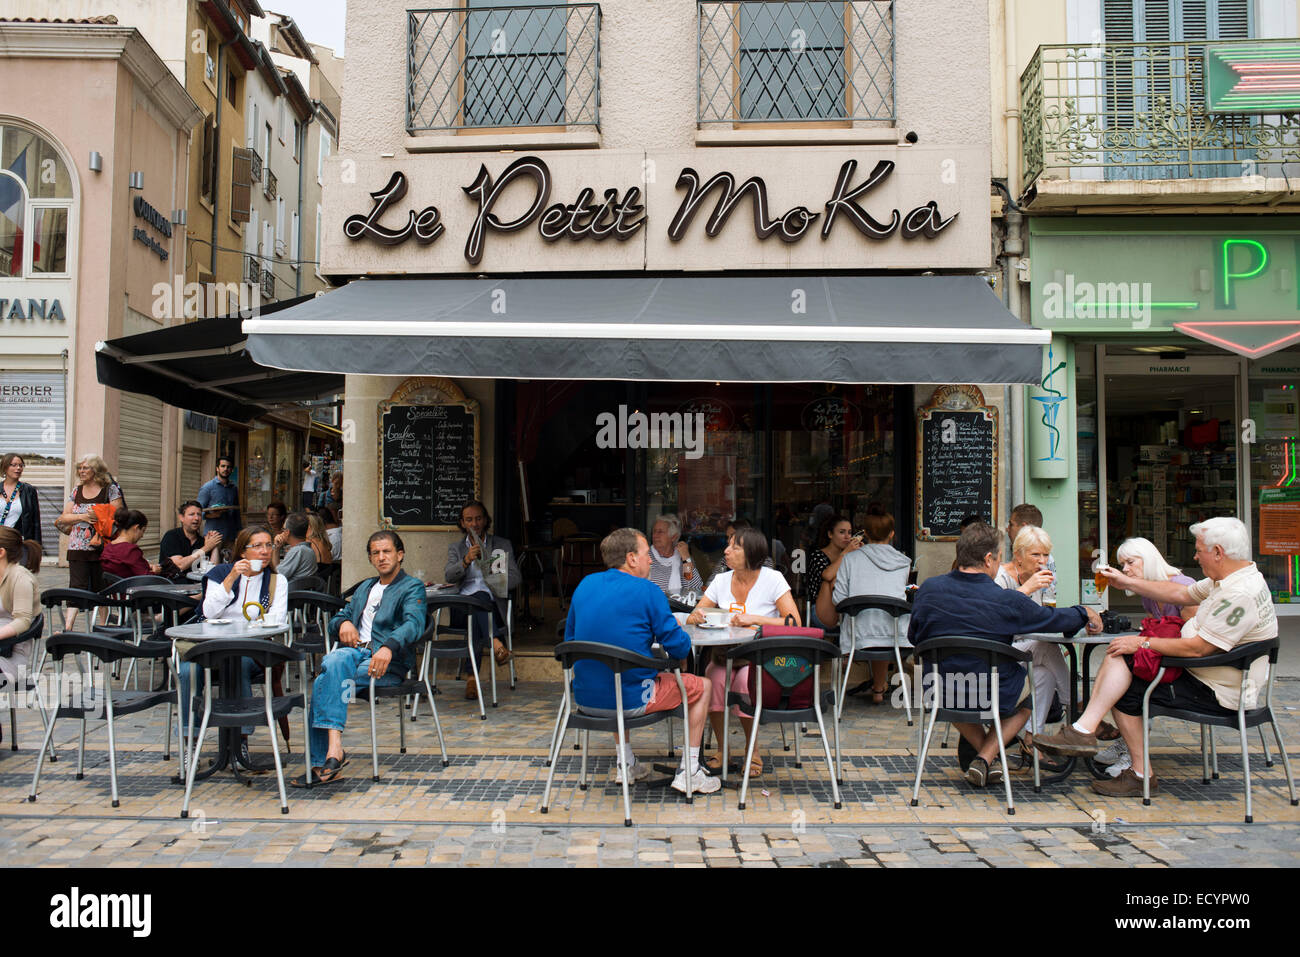 Le Petit Moka bar restaurant at Town hall square. Narbonne. Pedestrian shopping street in old city central Narbonne. South of Fr Stock Photo